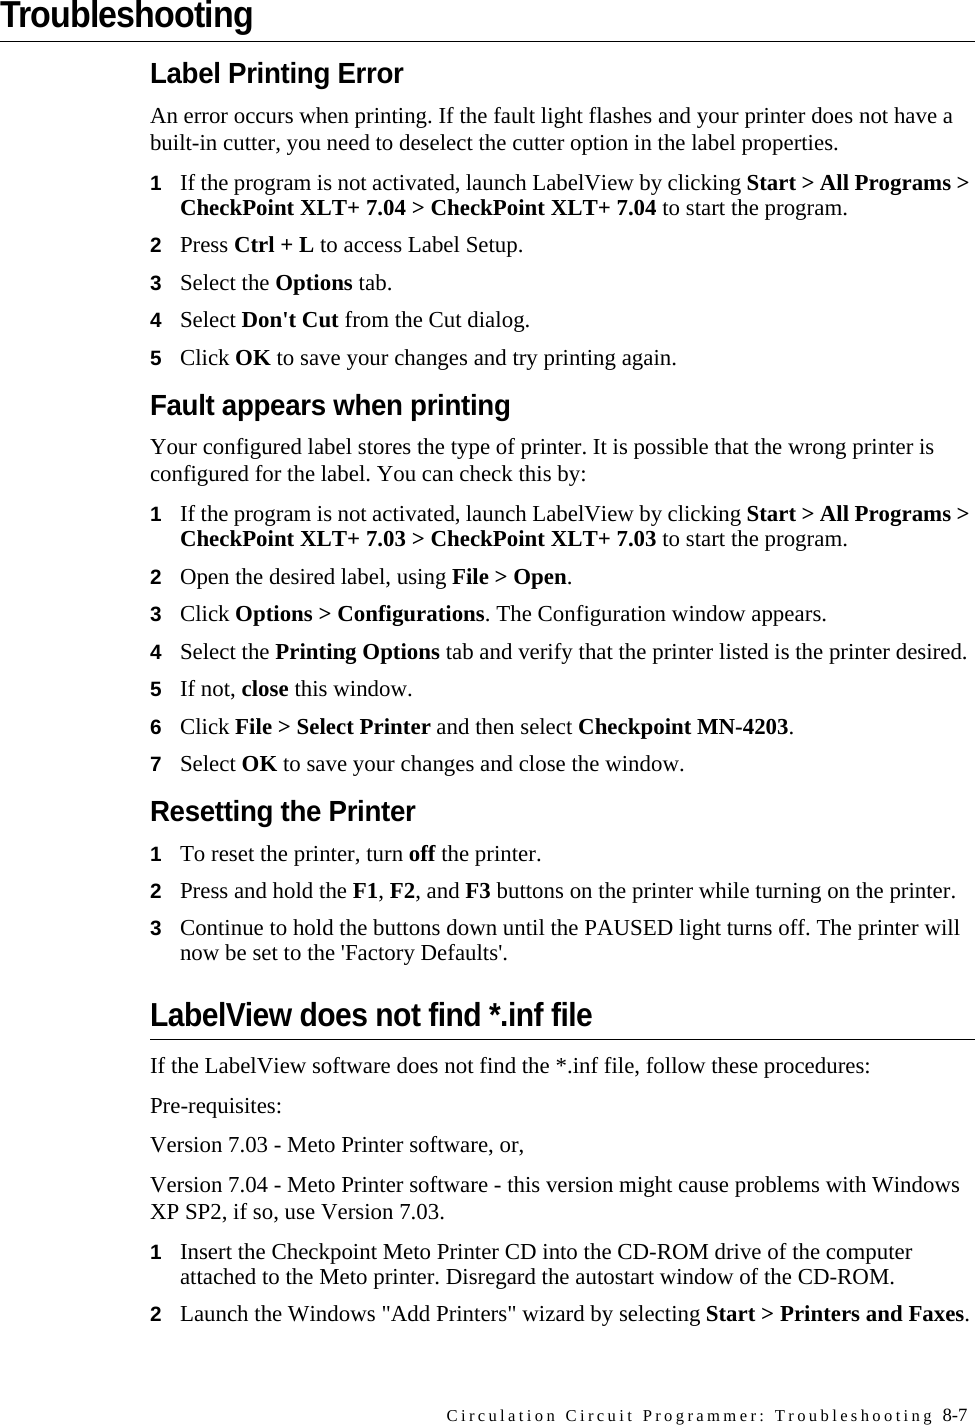 Circulation Circuit Programmer: Troubleshooting 8-7TroubleshootingLabel Printing ErrorAn error occurs when printing. If the fault light flashes and your printer does not have a built-in cutter, you need to deselect the cutter option in the label properties. 1If the program is not activated, launch LabelView by clicking Start &gt; All Programs &gt; CheckPoint XLT+ 7.04 &gt; CheckPoint XLT+ 7.04 to start the program.2Press Ctrl + L to access Label Setup. 3Select the Options tab.4Select Don&apos;t Cut from the Cut dialog.5Click OK to save your changes and try printing again.Fault appears when printingYour configured label stores the type of printer. It is possible that the wrong printer is configured for the label. You can check this by:1If the program is not activated, launch LabelView by clicking Start &gt; All Programs &gt; CheckPoint XLT+ 7.03 &gt; CheckPoint XLT+ 7.03 to start the program.2Open the desired label, using File &gt; Open.3Click Options &gt; Configurations. The Configuration window appears.4Select the Printing Options tab and verify that the printer listed is the printer desired.5If not, close this window.6Click File &gt; Select Printer and then select Checkpoint MN-4203. 7Select OK to save your changes and close the window.Resetting the Printer1To reset the printer, turn off the printer.2Press and hold the F1, F2, and F3 buttons on the printer while turning on the printer. 3Continue to hold the buttons down until the PAUSED light turns off. The printer will now be set to the &apos;Factory Defaults&apos;. LabelView does not find *.inf fileIf the LabelView software does not find the *.inf file, follow these procedures:Pre-requisites:Version 7.03 - Meto Printer software, or,Version 7.04 - Meto Printer software - this version might cause problems with Windows XP SP2, if so, use Version 7.03.1Insert the Checkpoint Meto Printer CD into the CD-ROM drive of the computer attached to the Meto printer. Disregard the autostart window of the CD-ROM.2Launch the Windows &quot;Add Printers&quot; wizard by selecting Start &gt; Printers and Faxes.